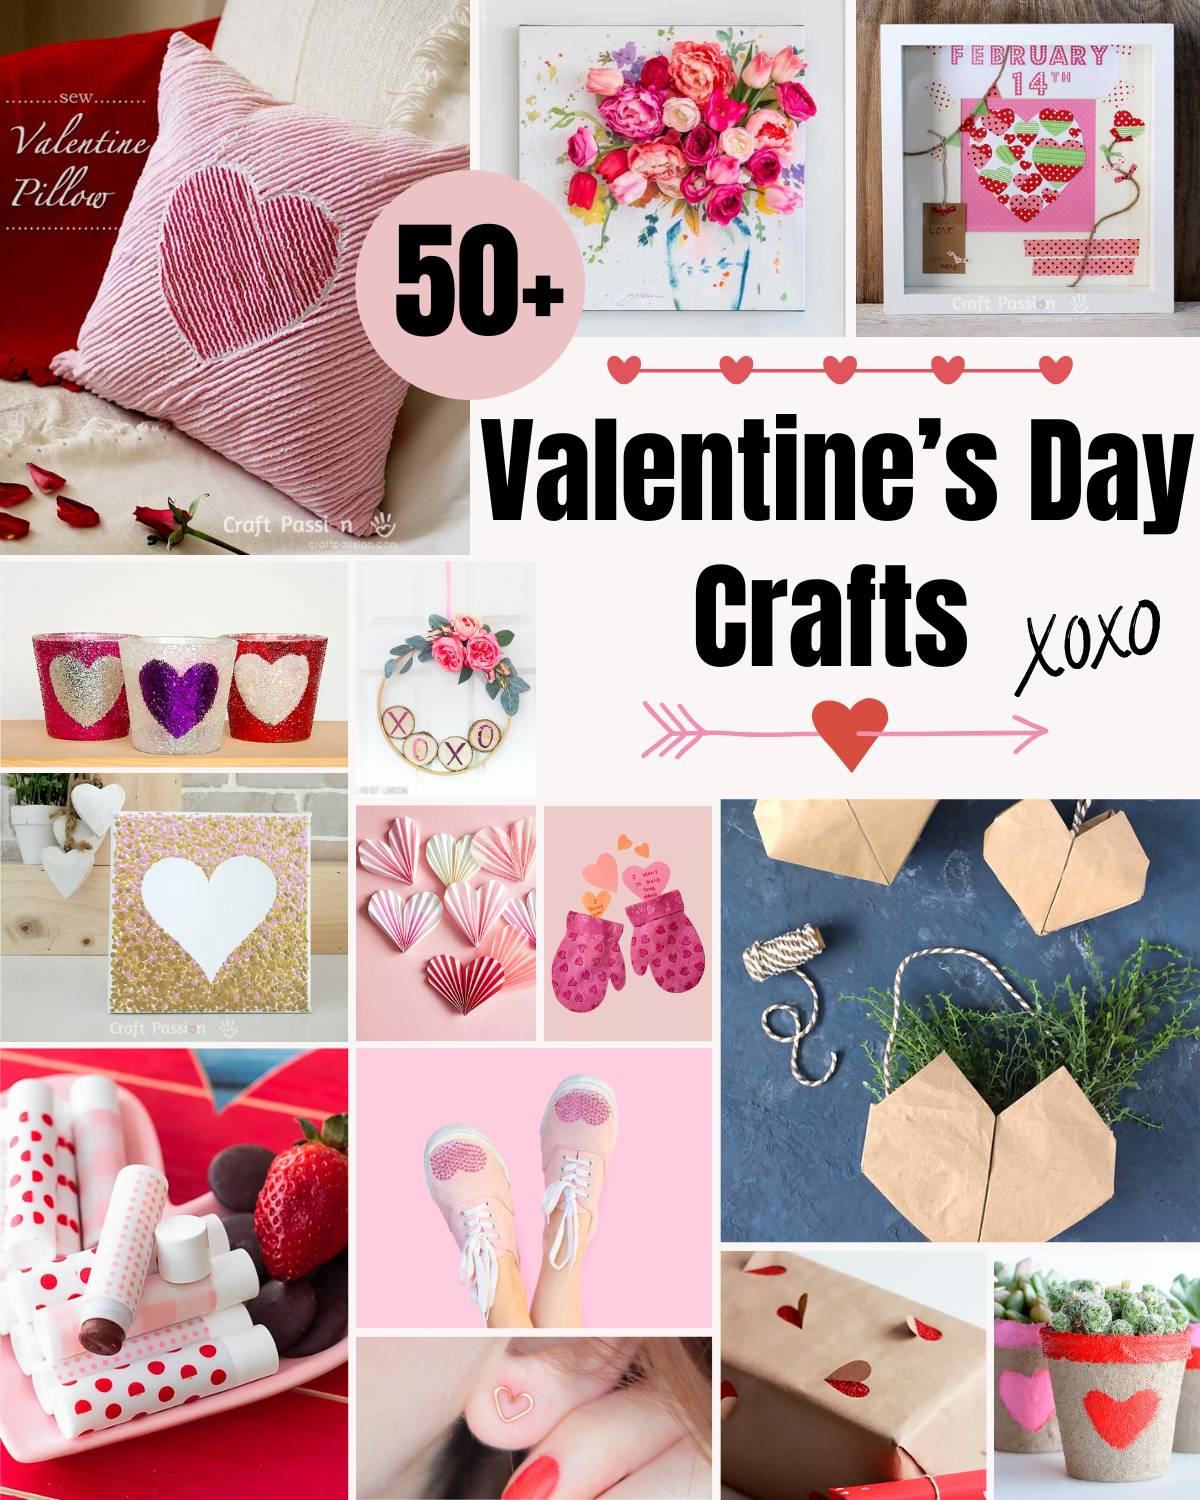 Get inspired this Valentine's and Galentine's with personalised DIY Valentines Day crafts. This roundup list puts together crafts for adults and kids to make.